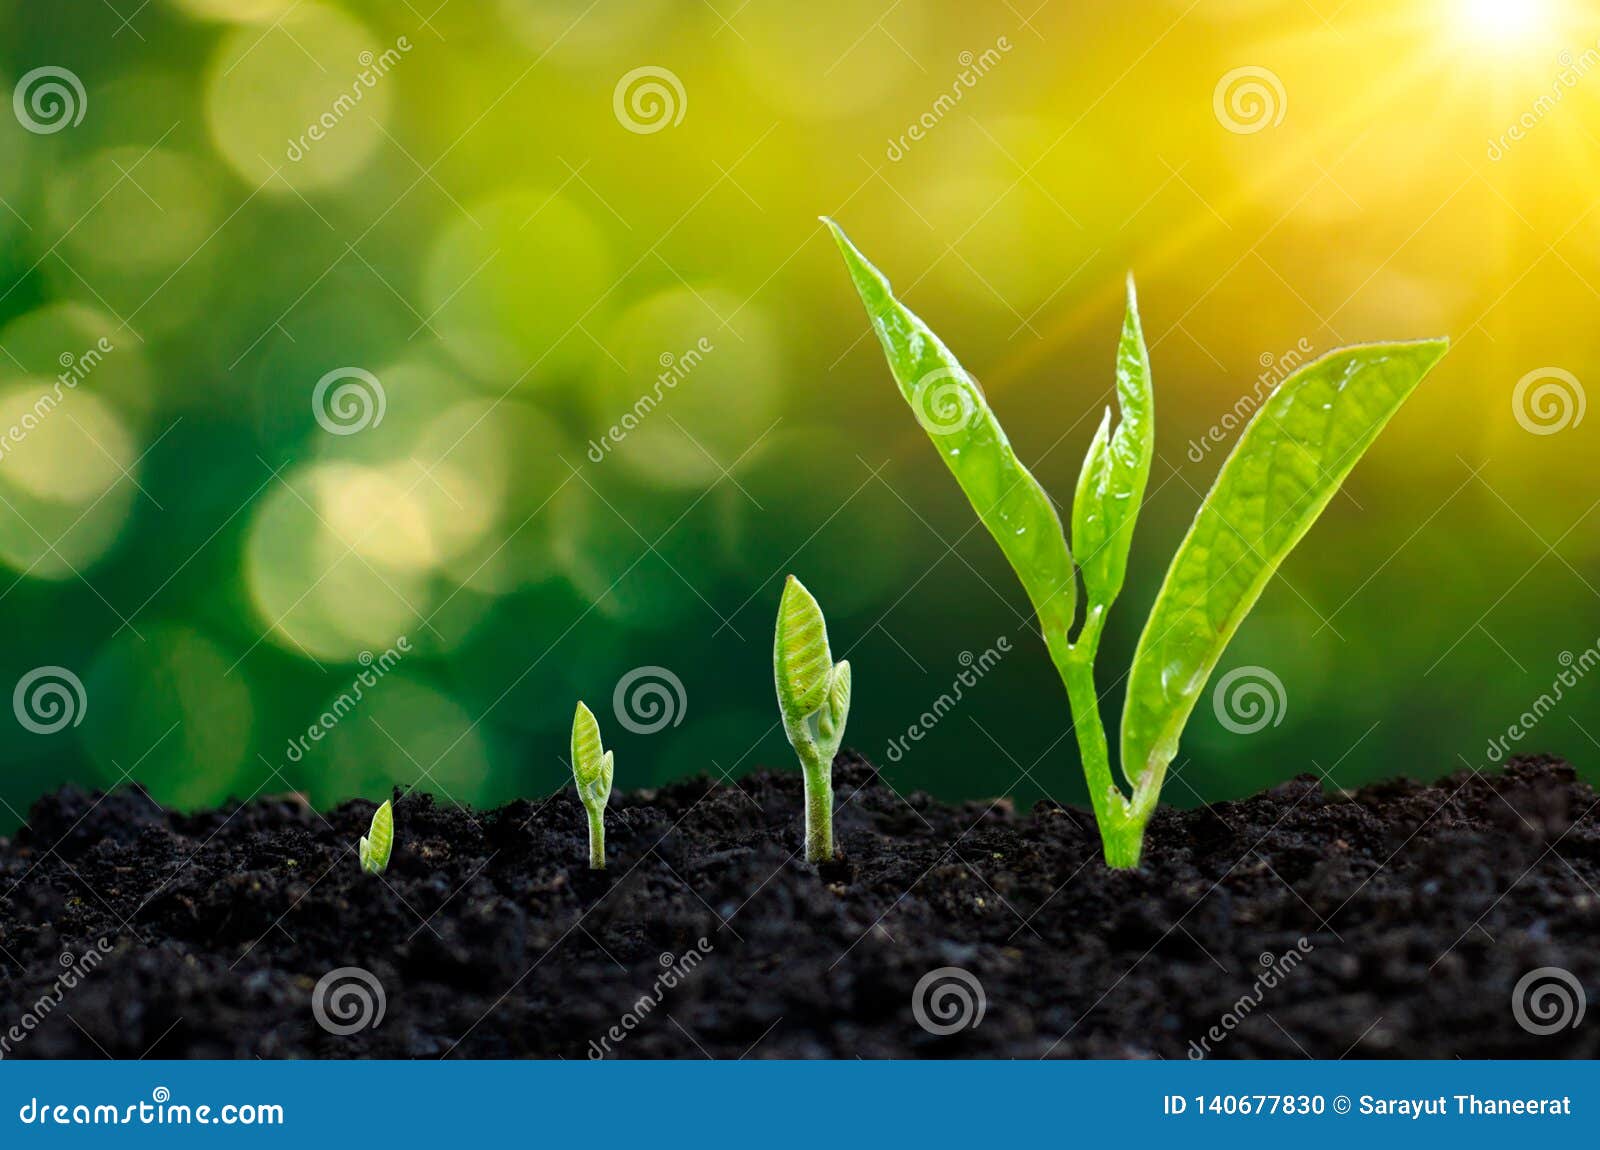 development of seedling growth planting seedlings young plant in the morning light on nature background